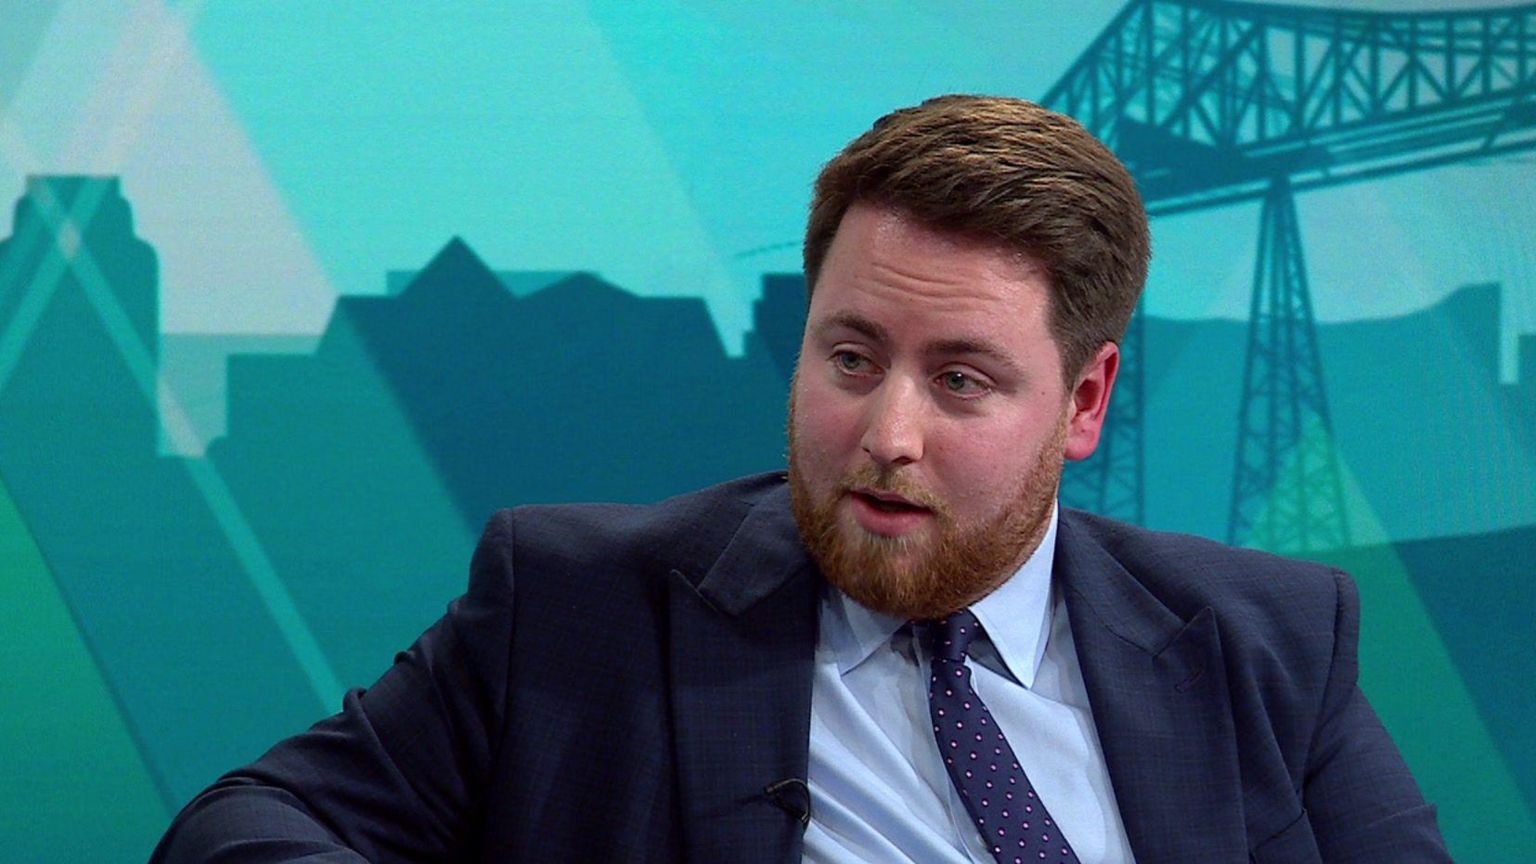 Jacob Young appearing on BBC One's Politics North